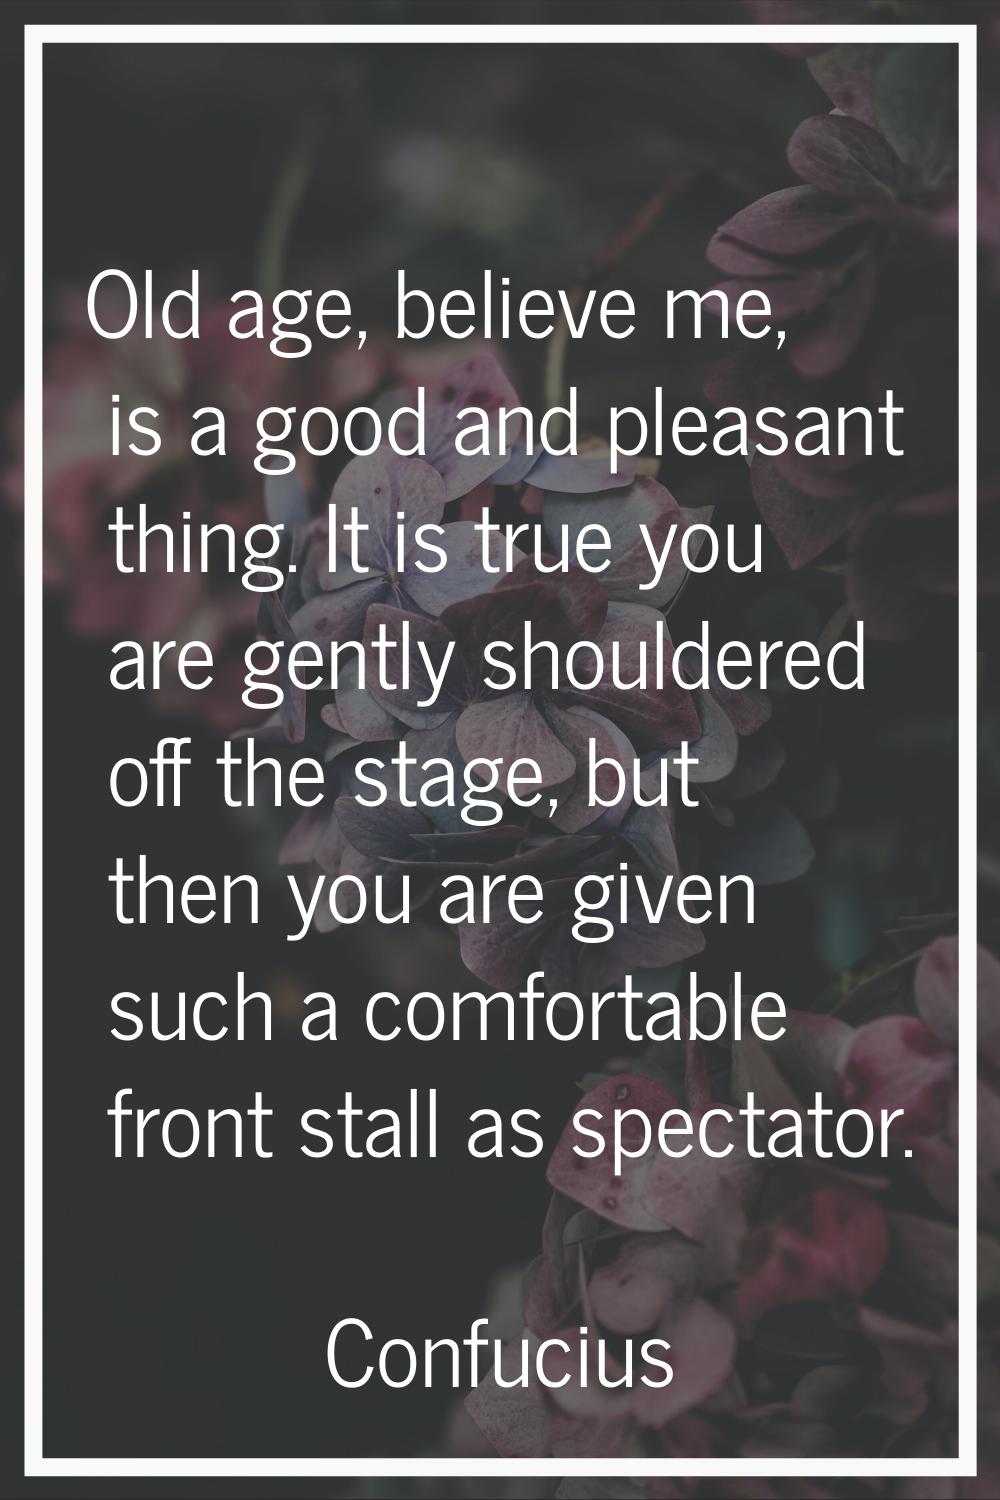 Old age, believe me, is a good and pleasant thing. It is true you are gently shouldered off the sta